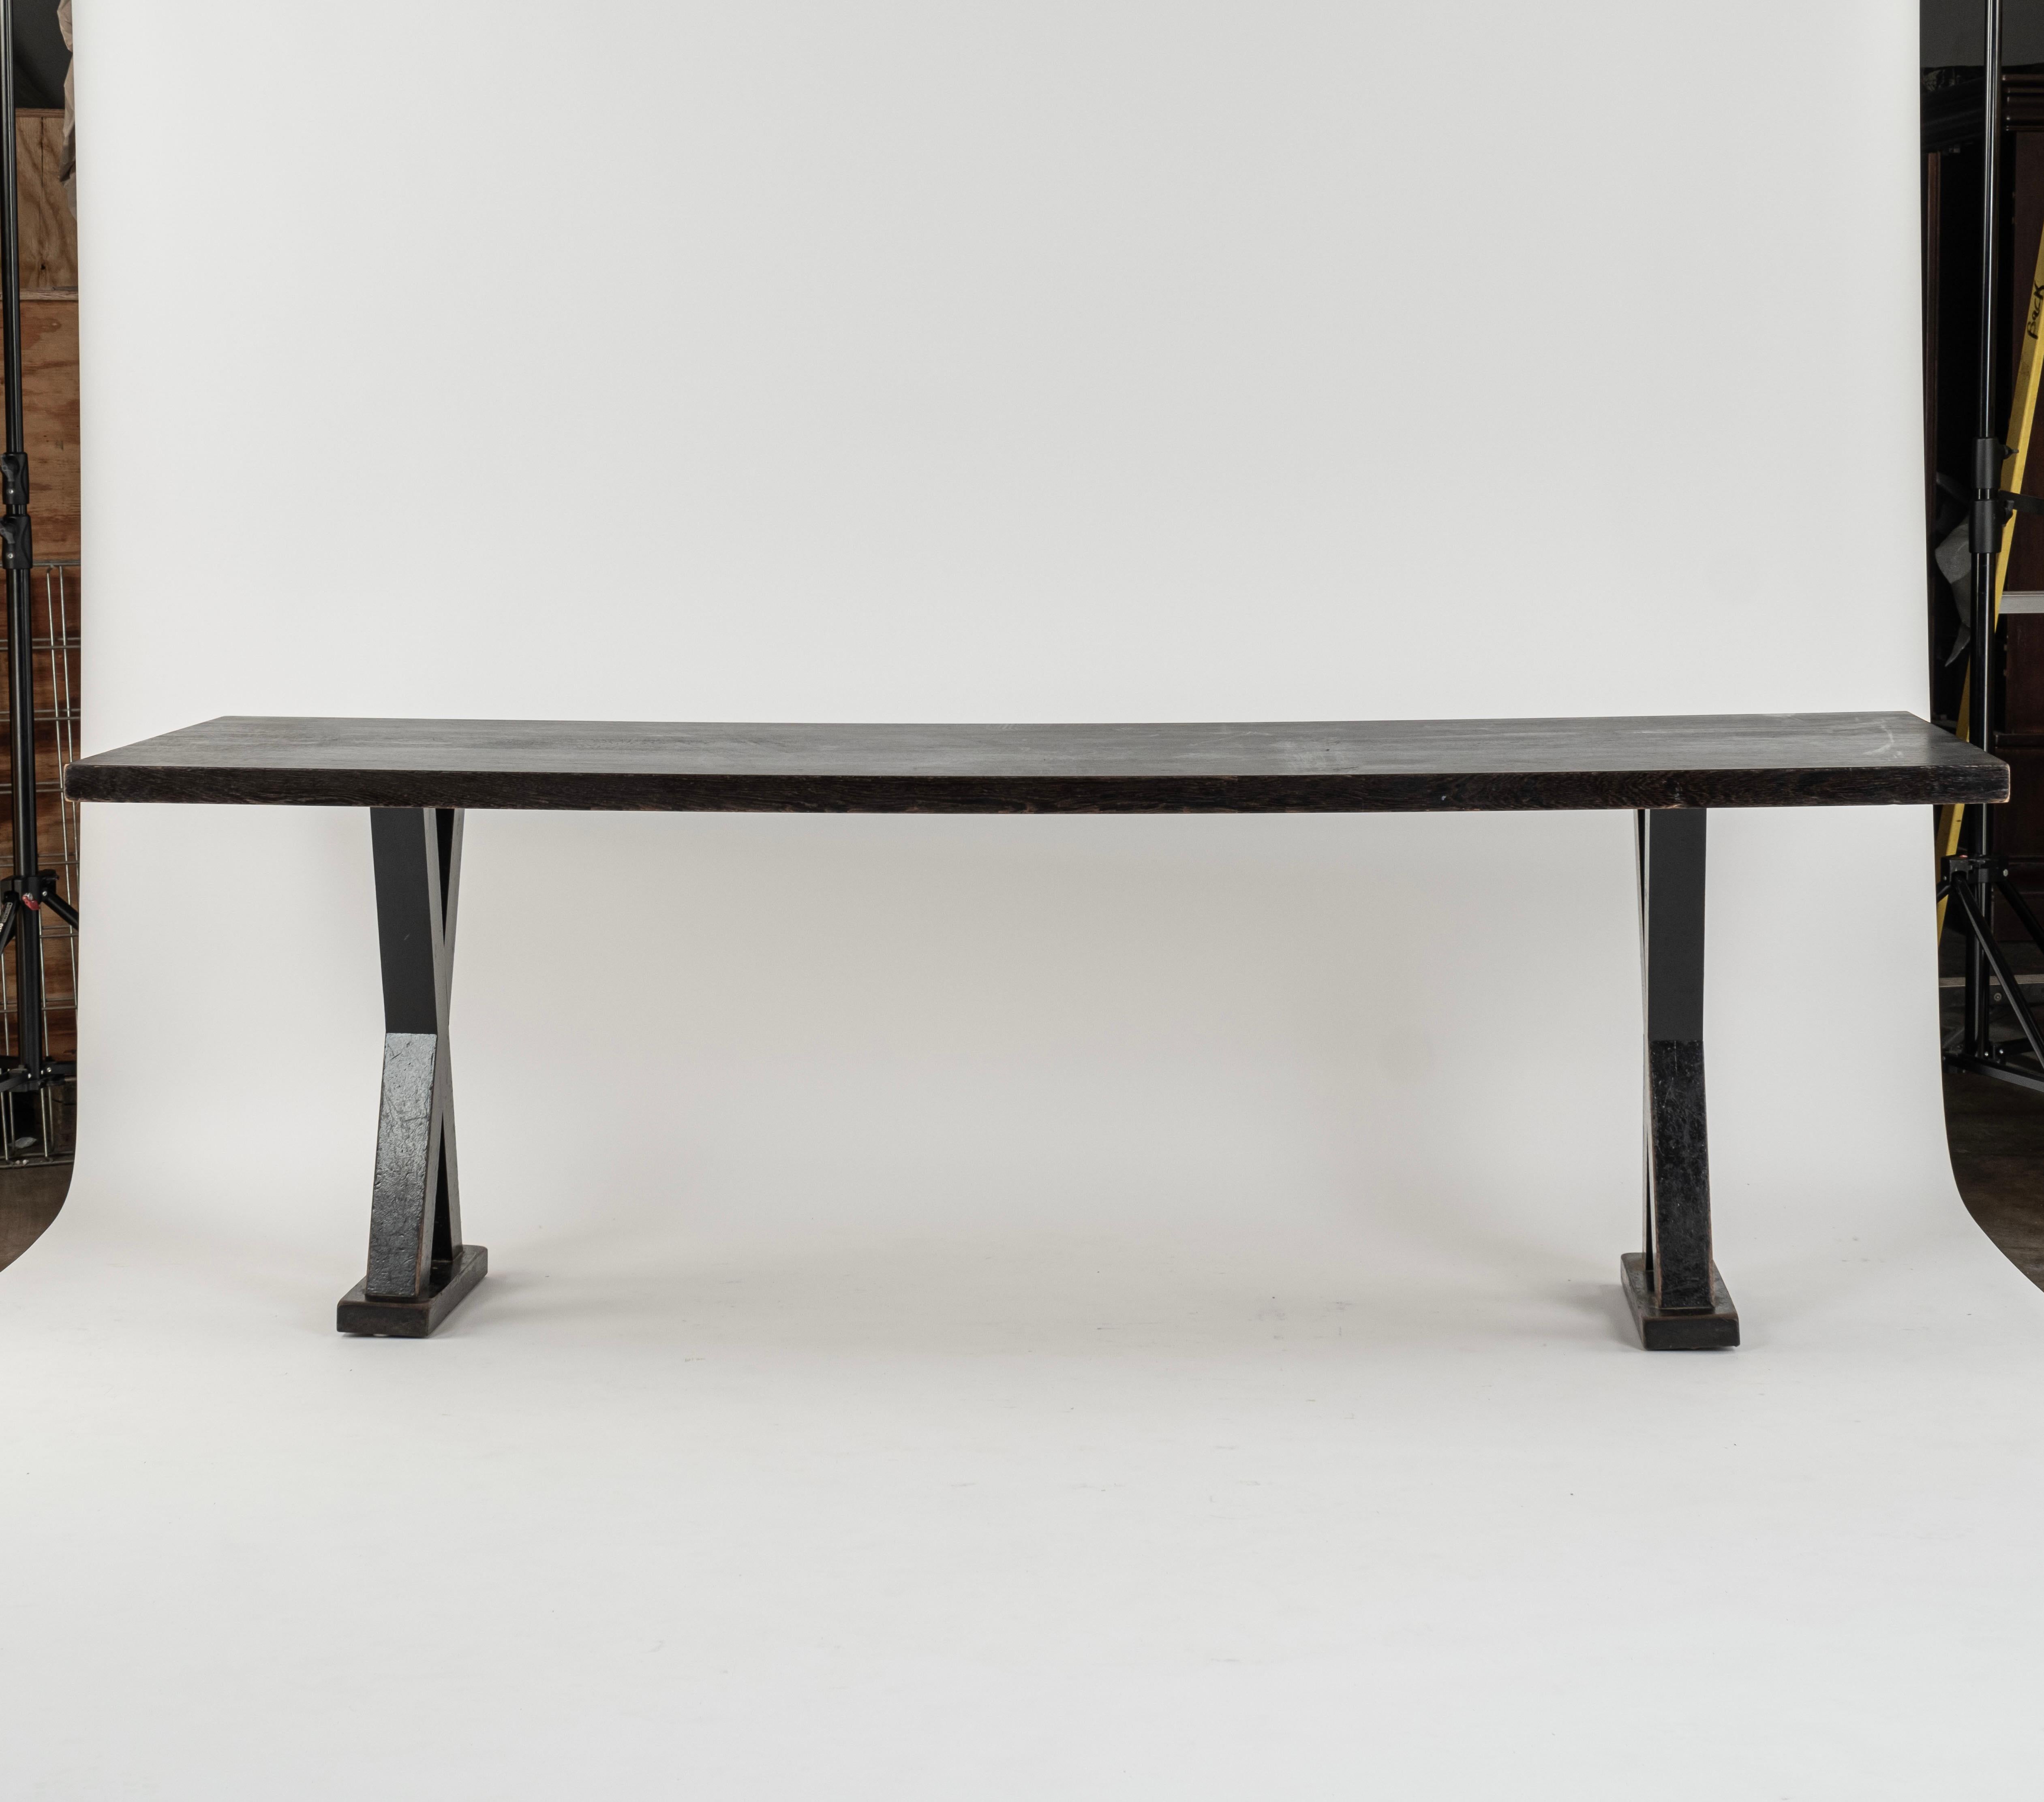 Inspired by Christian Liaigre (French, 1943-2020) Mercer Kitchen (designed 1997) long dining table, of rectangular form with x-supports on confirming plinths. 28.5